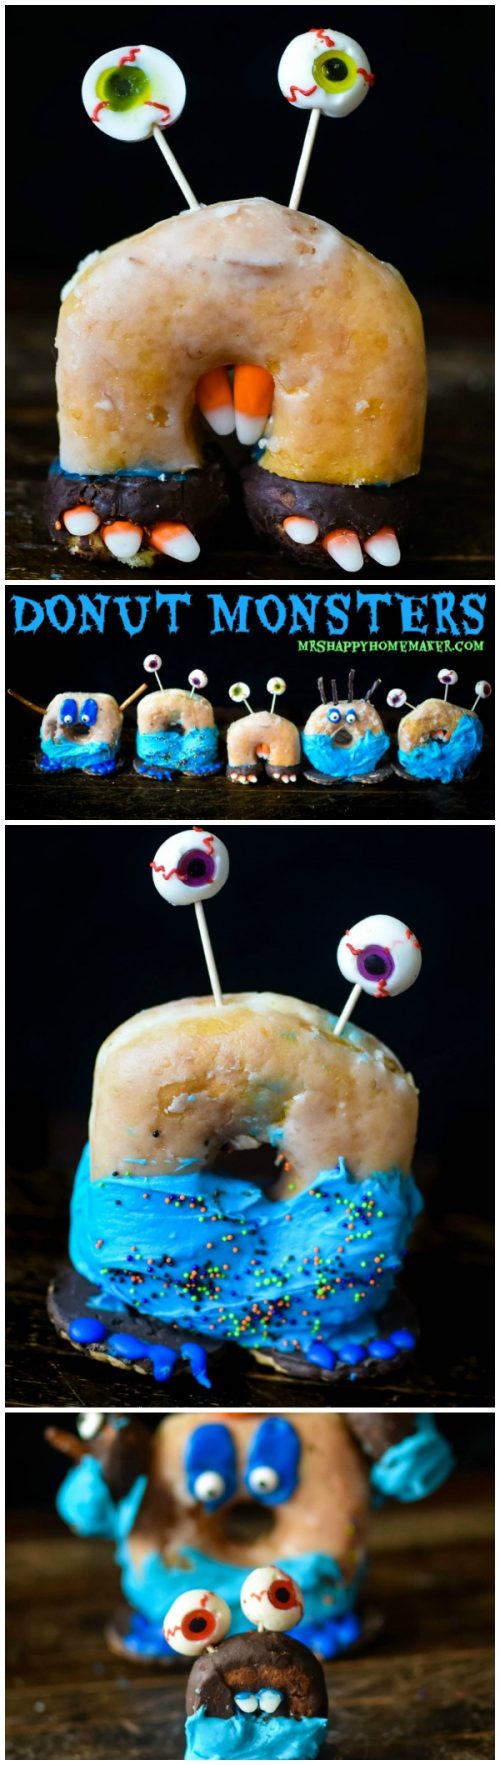 These EASY DONUT MONSTERS are a fun, edible craft for kids & adults of all ages. A dessert & activity all in one & no baking required! | MrsHappyHomemaker.com @mrshappyhomemaker